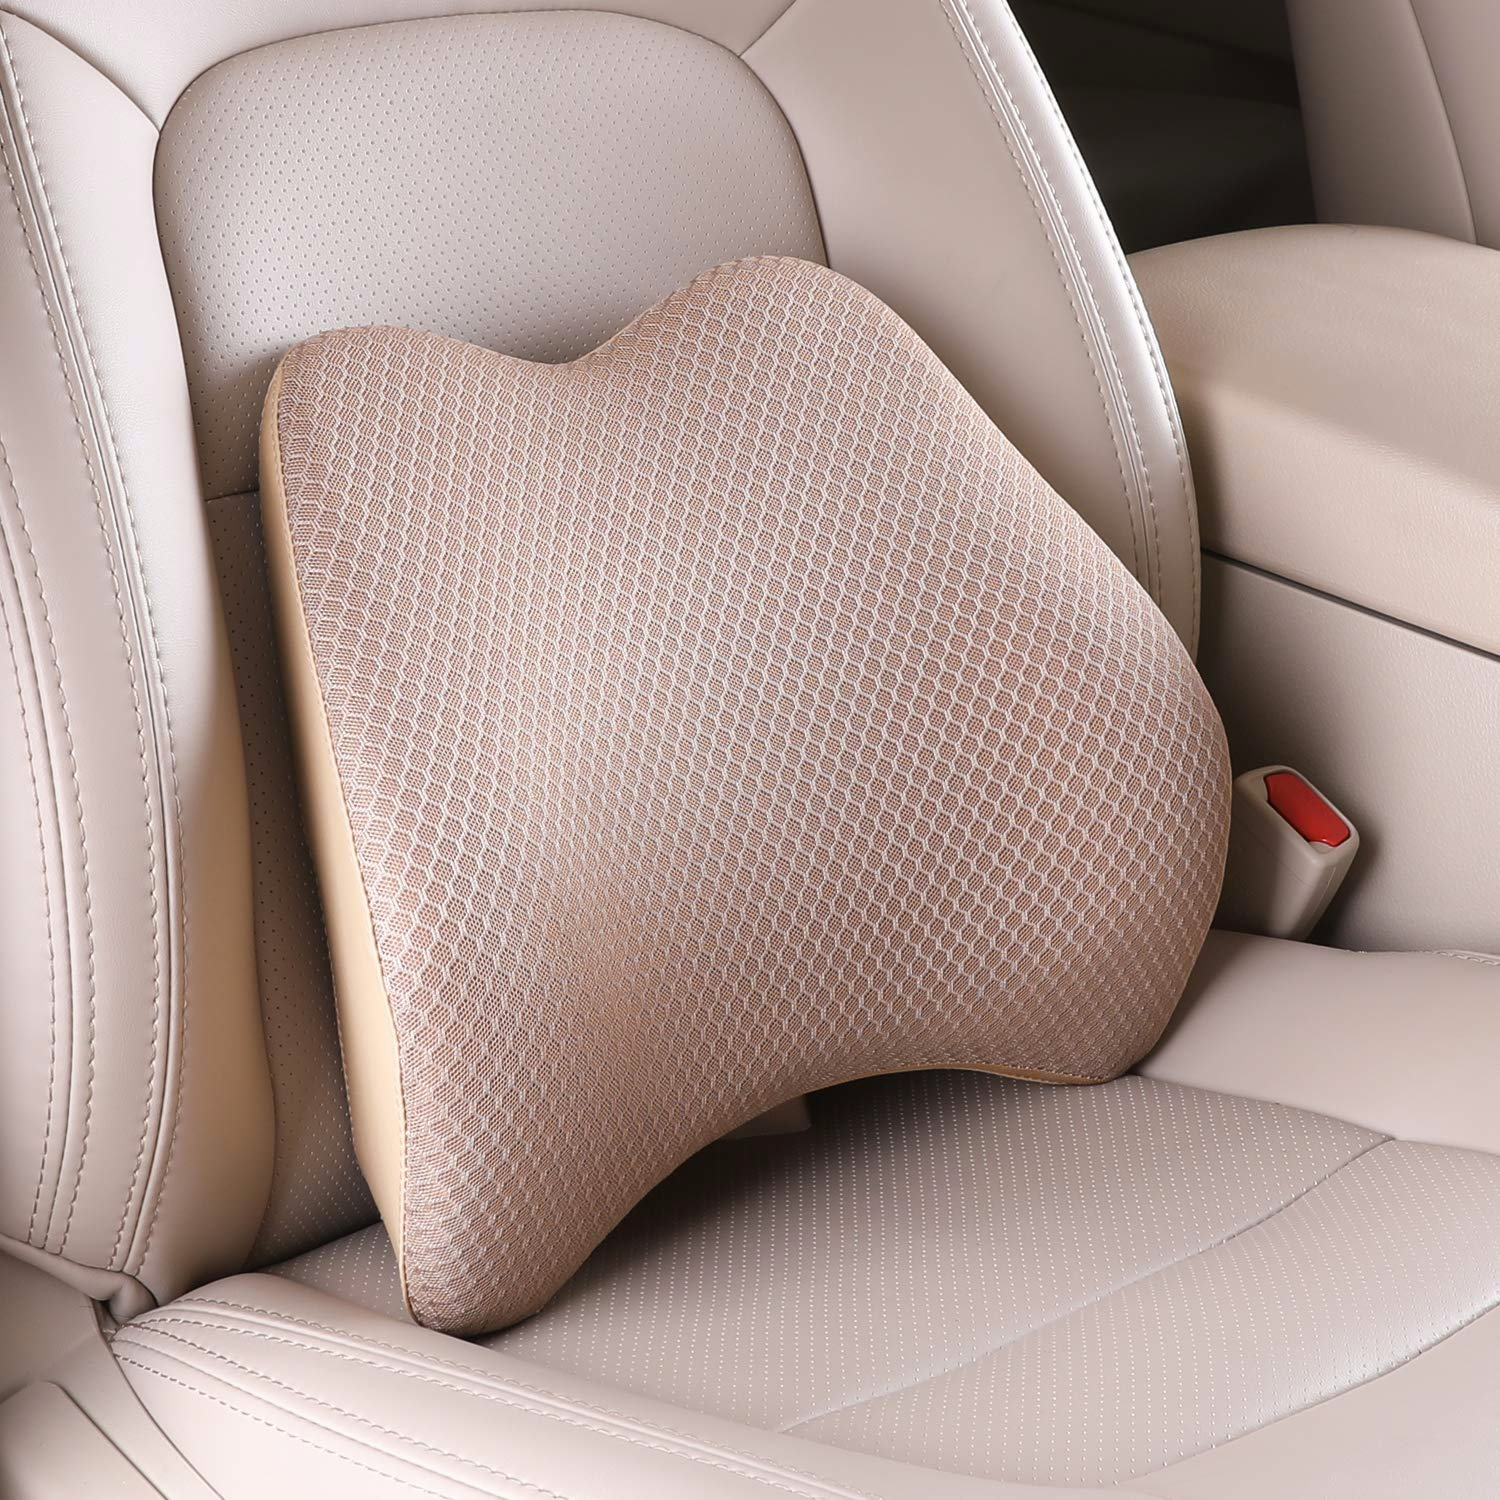 Lumbar Support Pillow Multi Use Chair Cushion for Driving Car Seat Cars